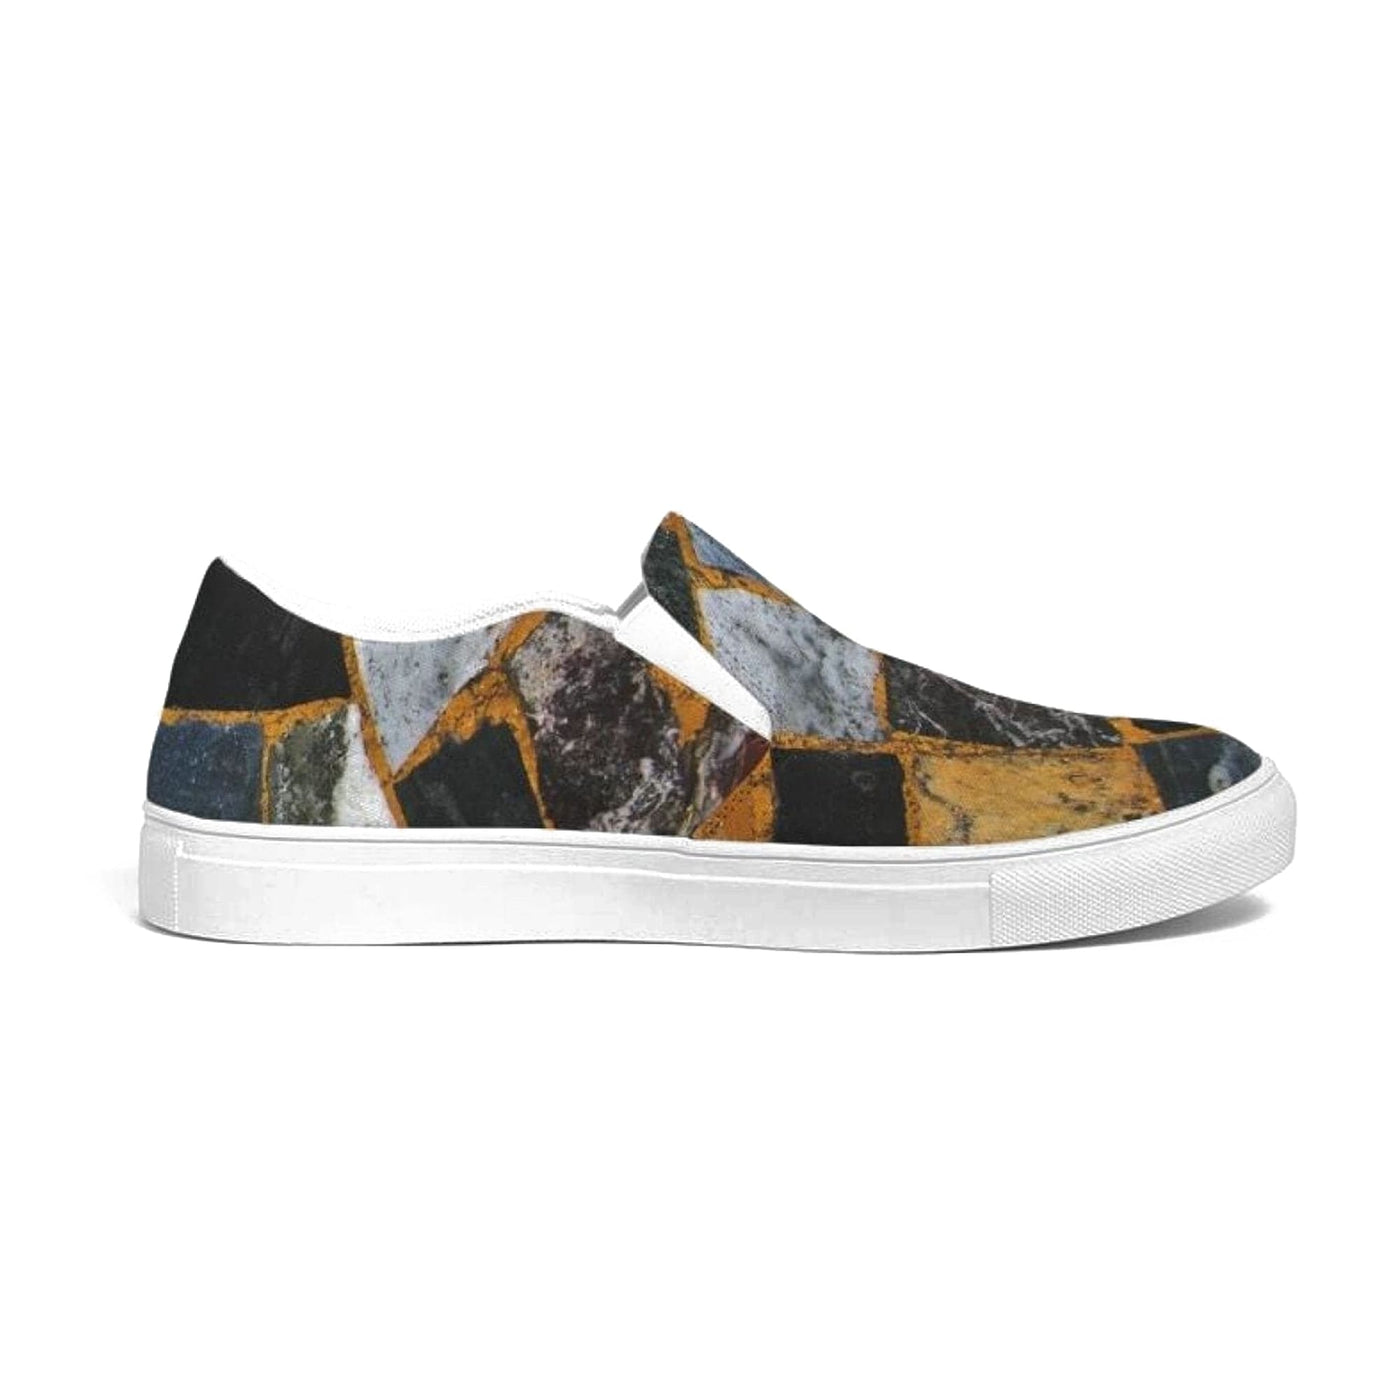 Womens Sneakers - Canvas Slip On Shoes Black Mosaic Print